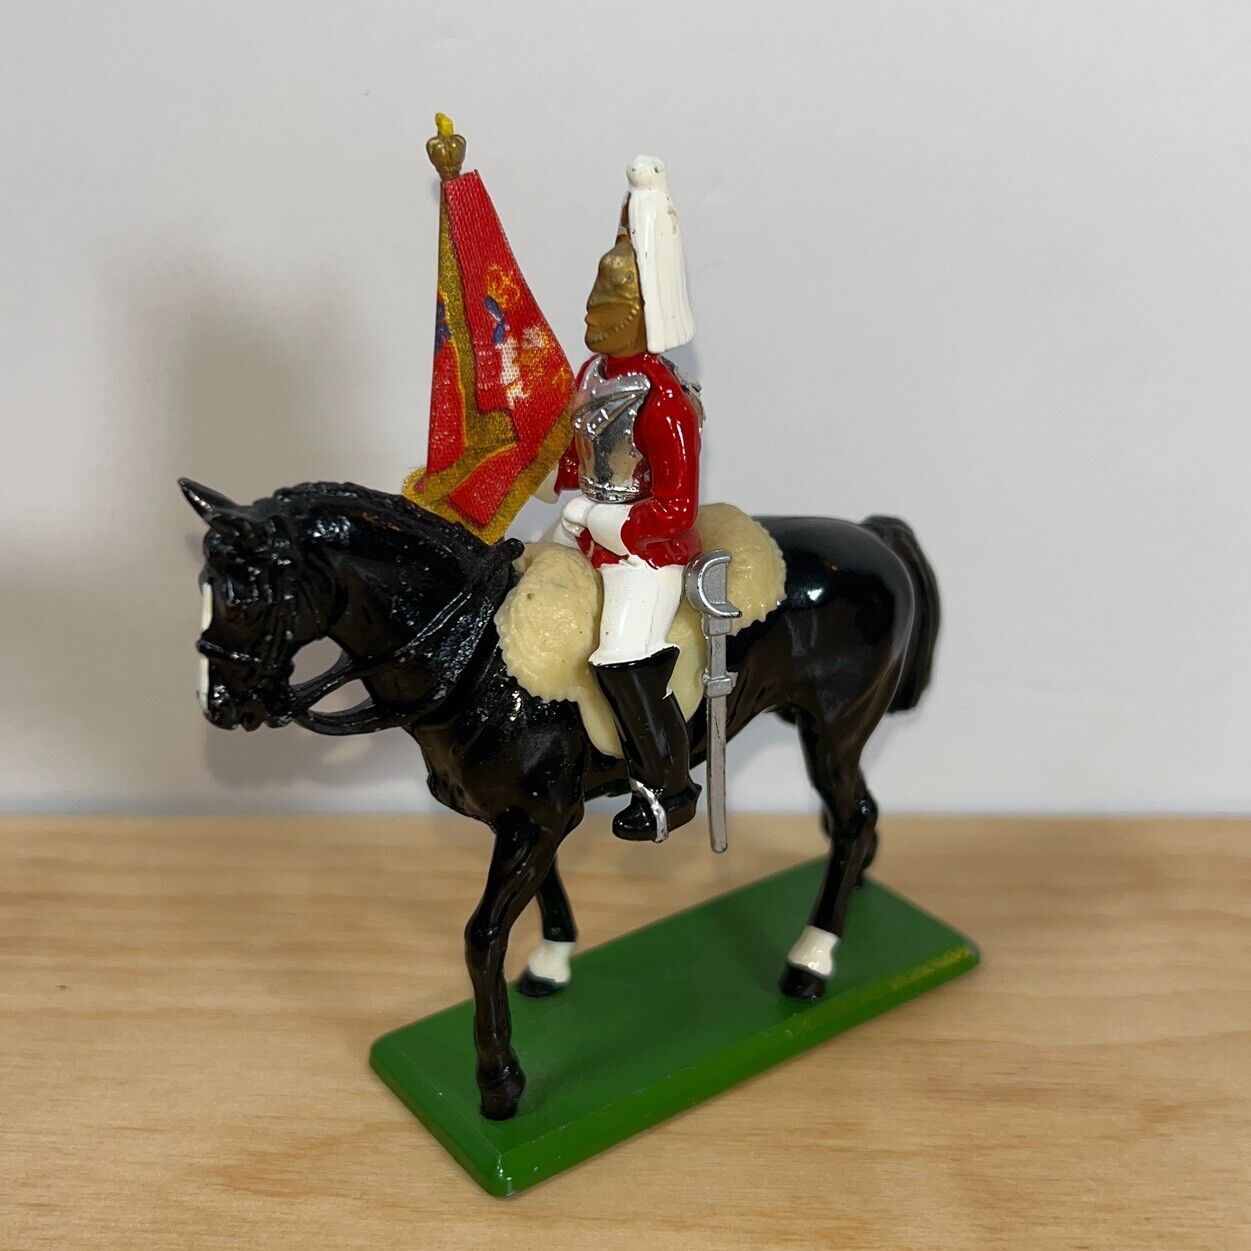 VTG 1988 W BRITAINS Cast British Soldiers 41076 Life Guard Mounted Flag Bearer